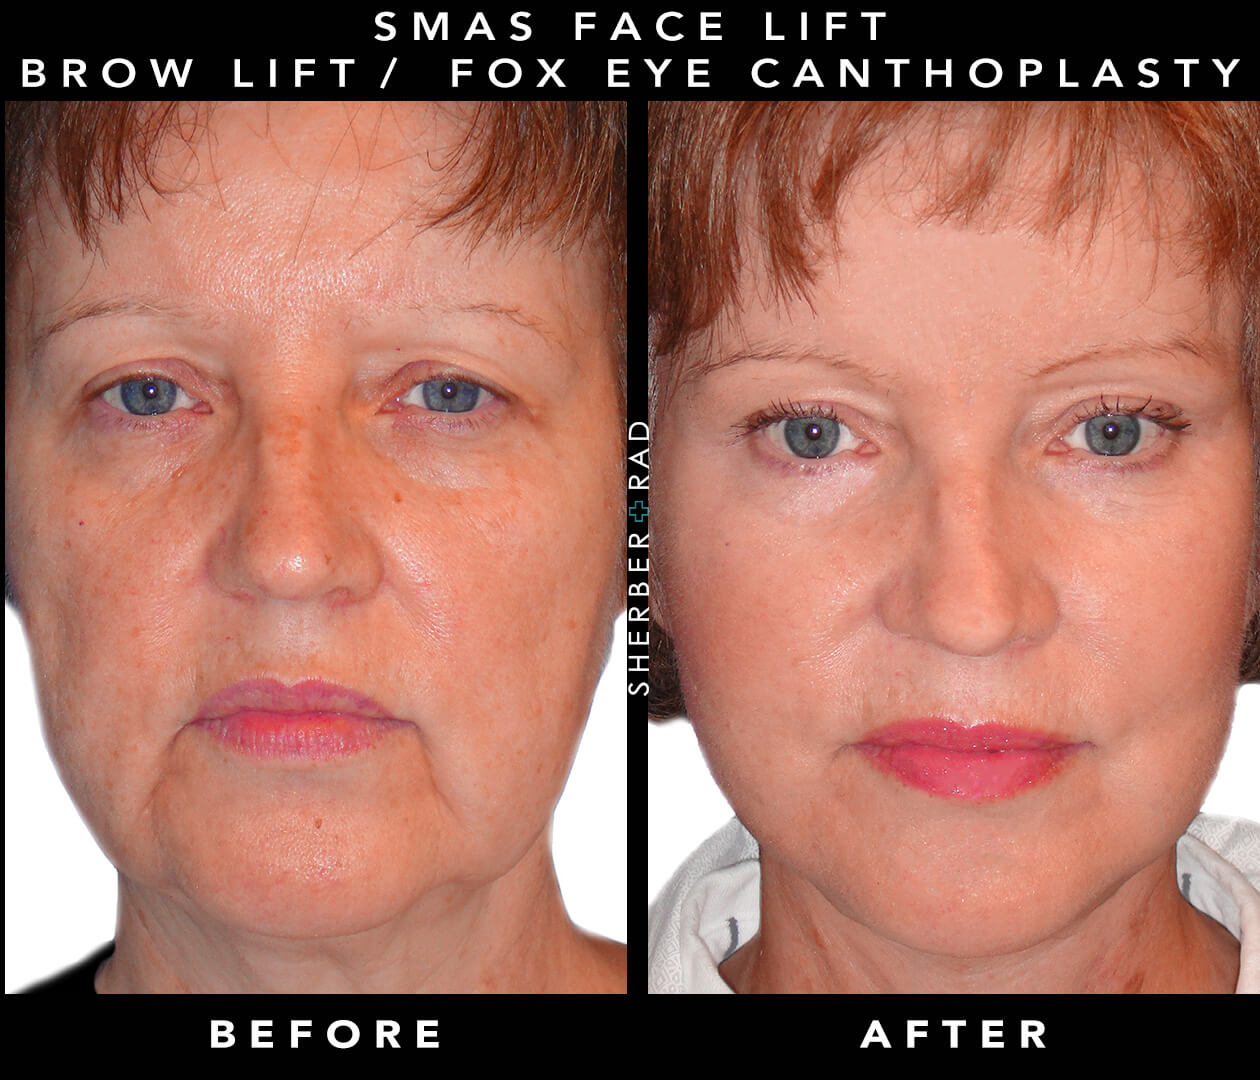 SMAS Plication Face/Neck Lift Before and After Results"